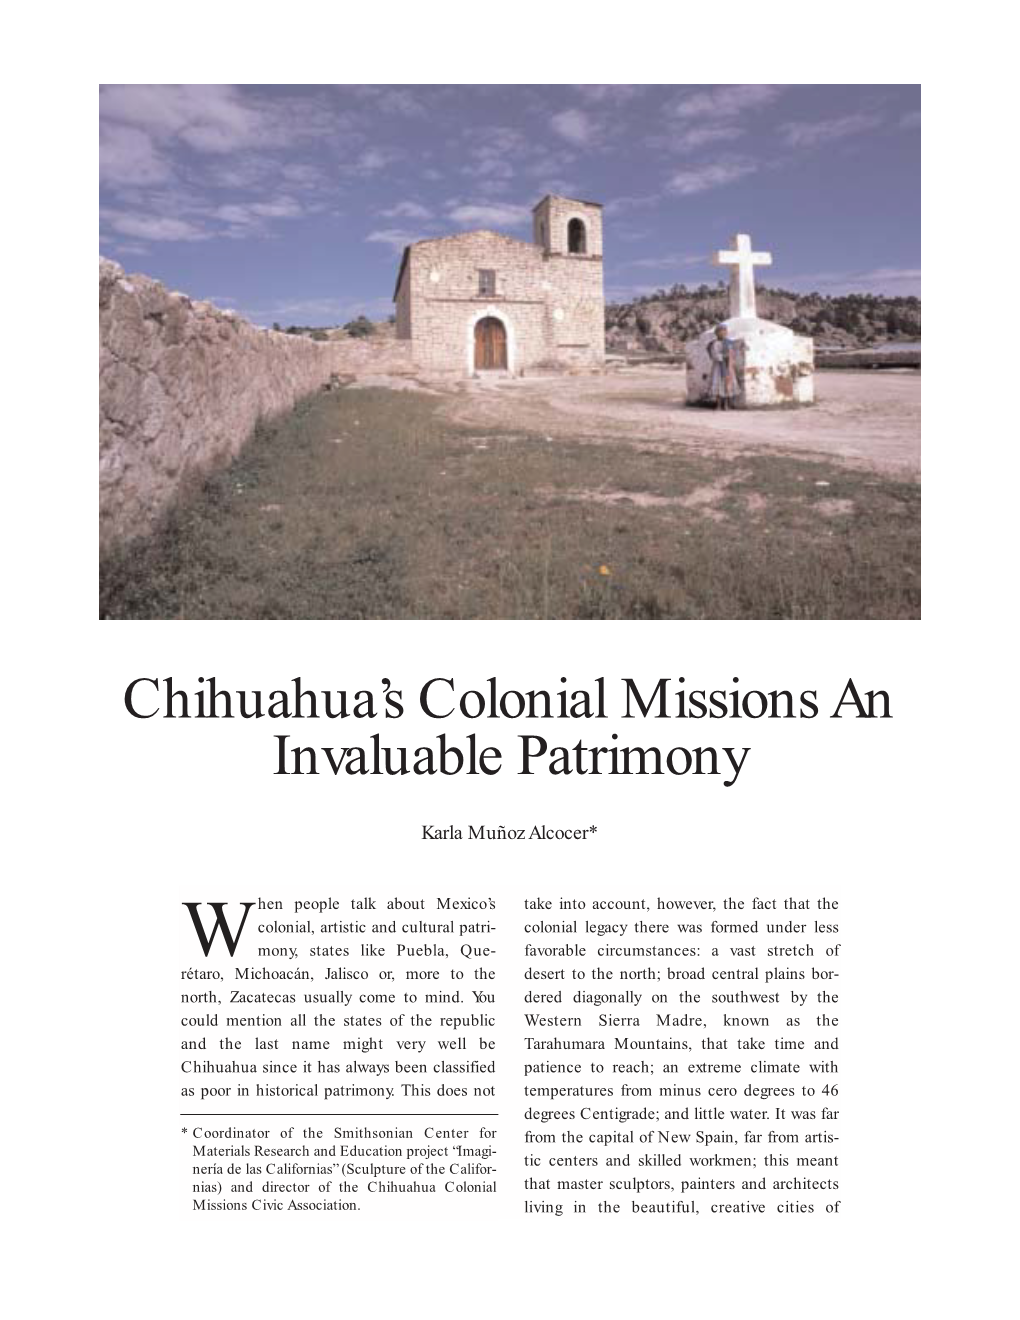 Chihuahua's Colonial Missions